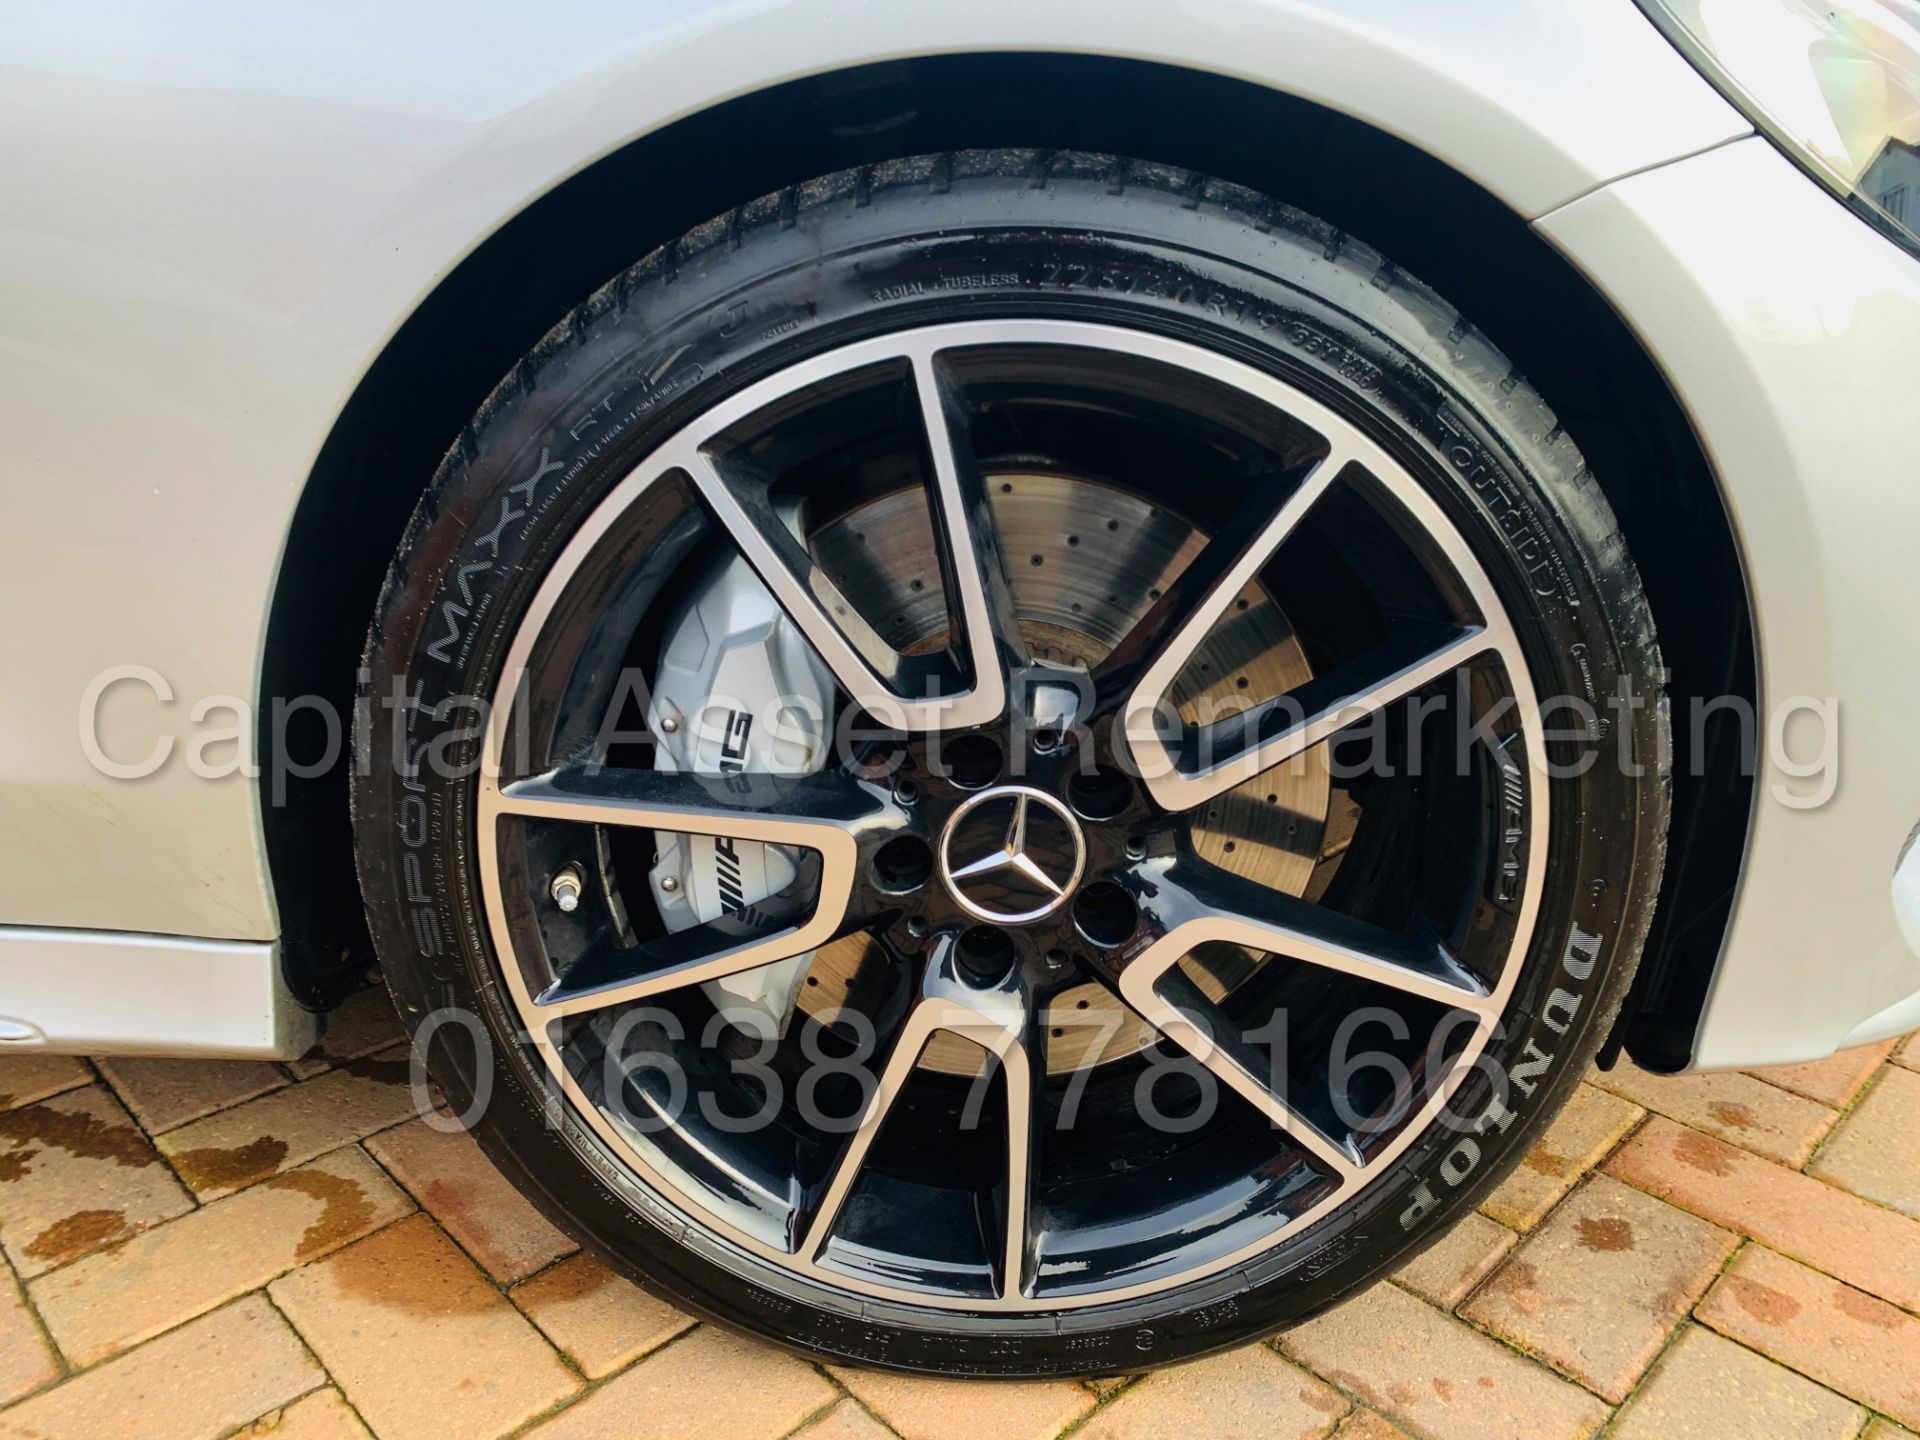 MERCEDES-BENZ C43 AMG *PREMIUM 4 MATIC* COUPE (2017) '9-G AUTO - LEATHER - SAT NAV' **FULLY LOADED** - Image 16 of 46